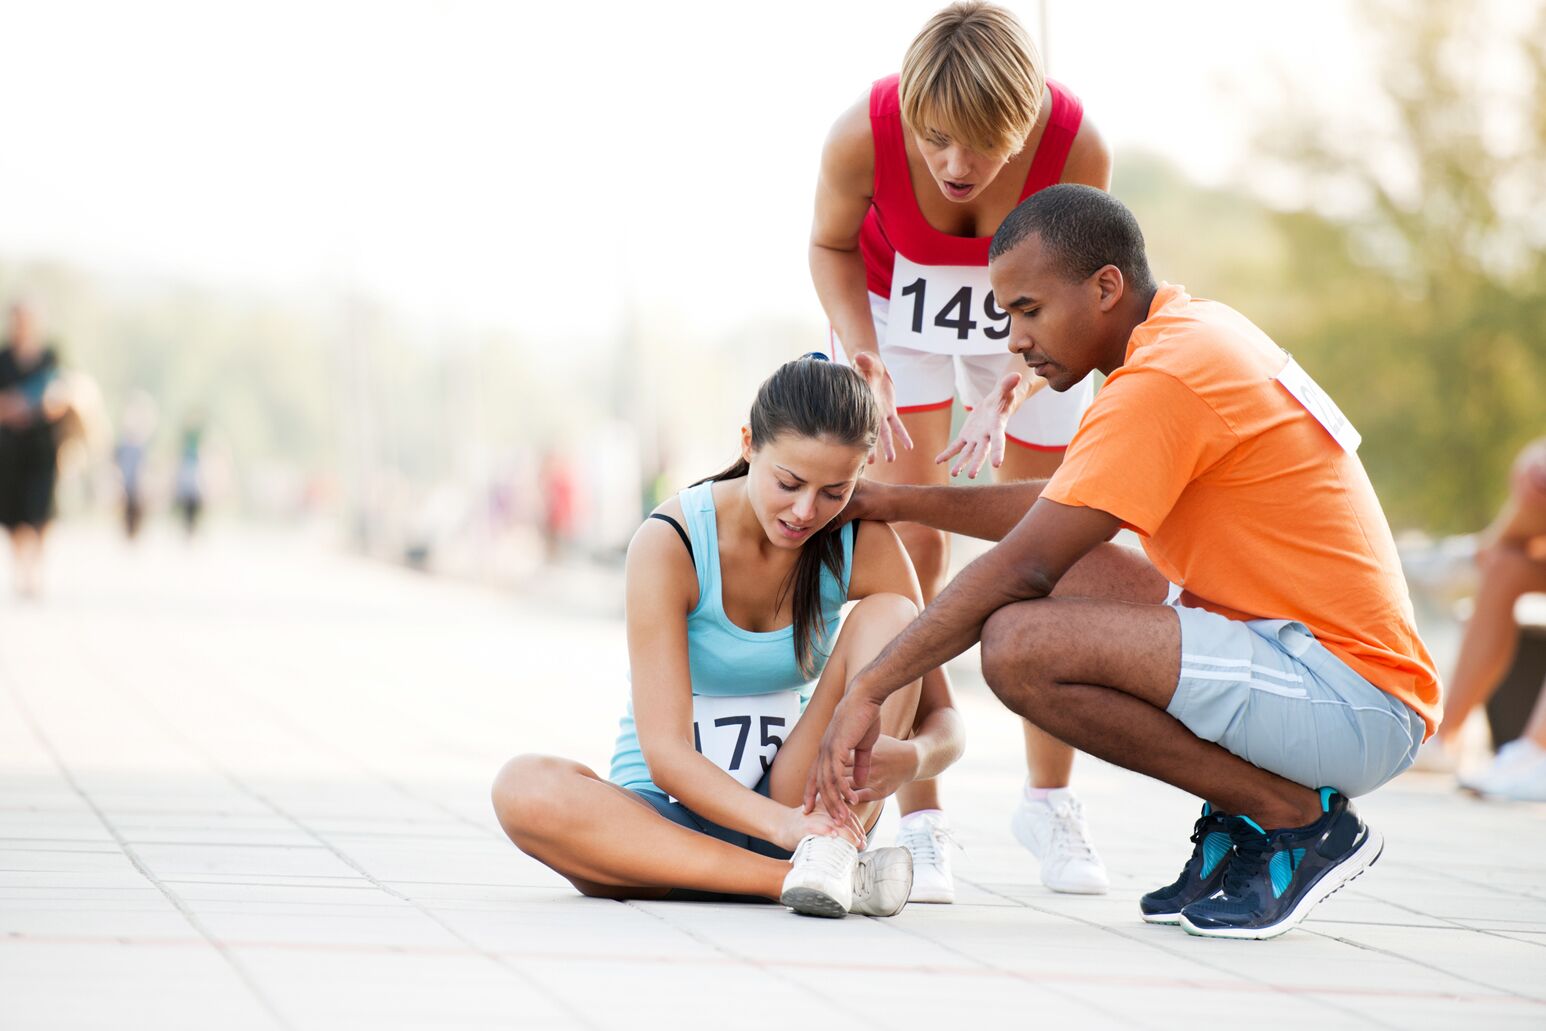 Tips and Stretches for Ankle Injury Prevention